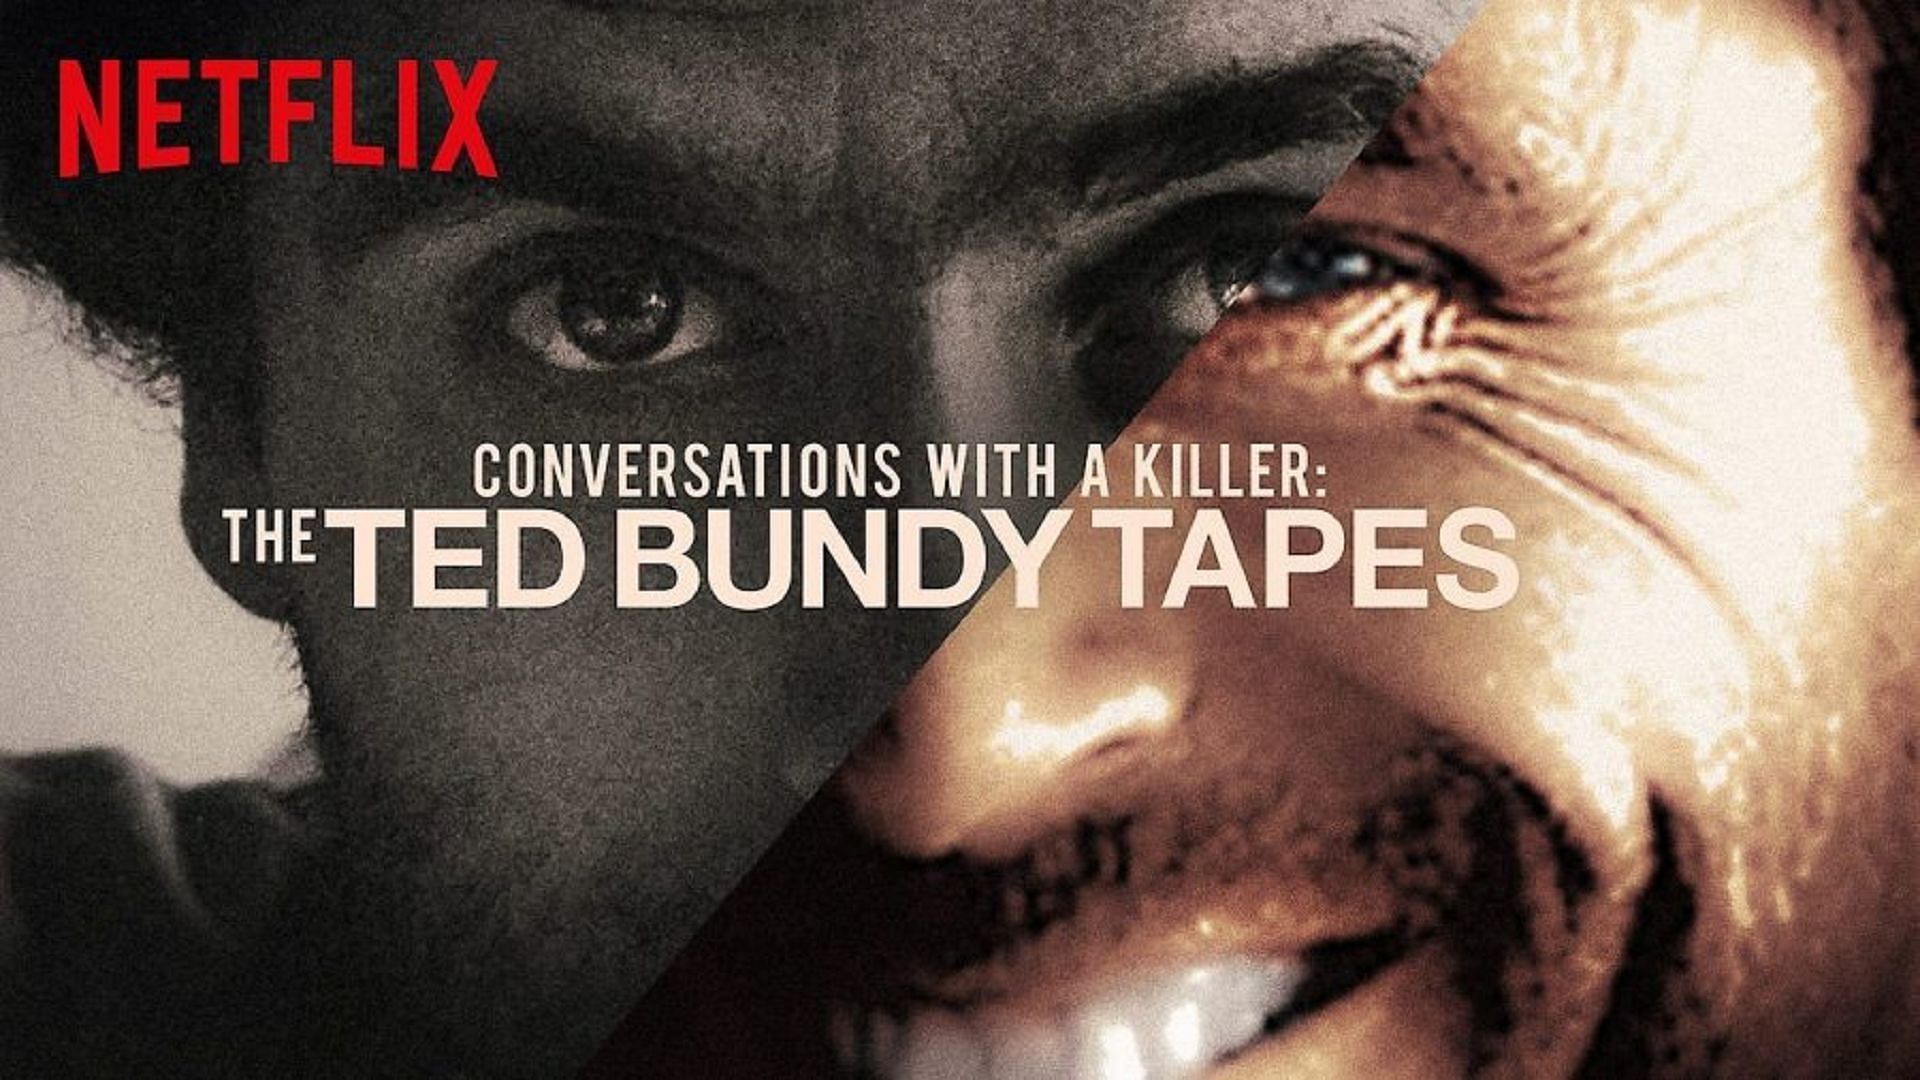 Conversations With a Killer: The Ted Bundy Tapes (Image via Netflix)